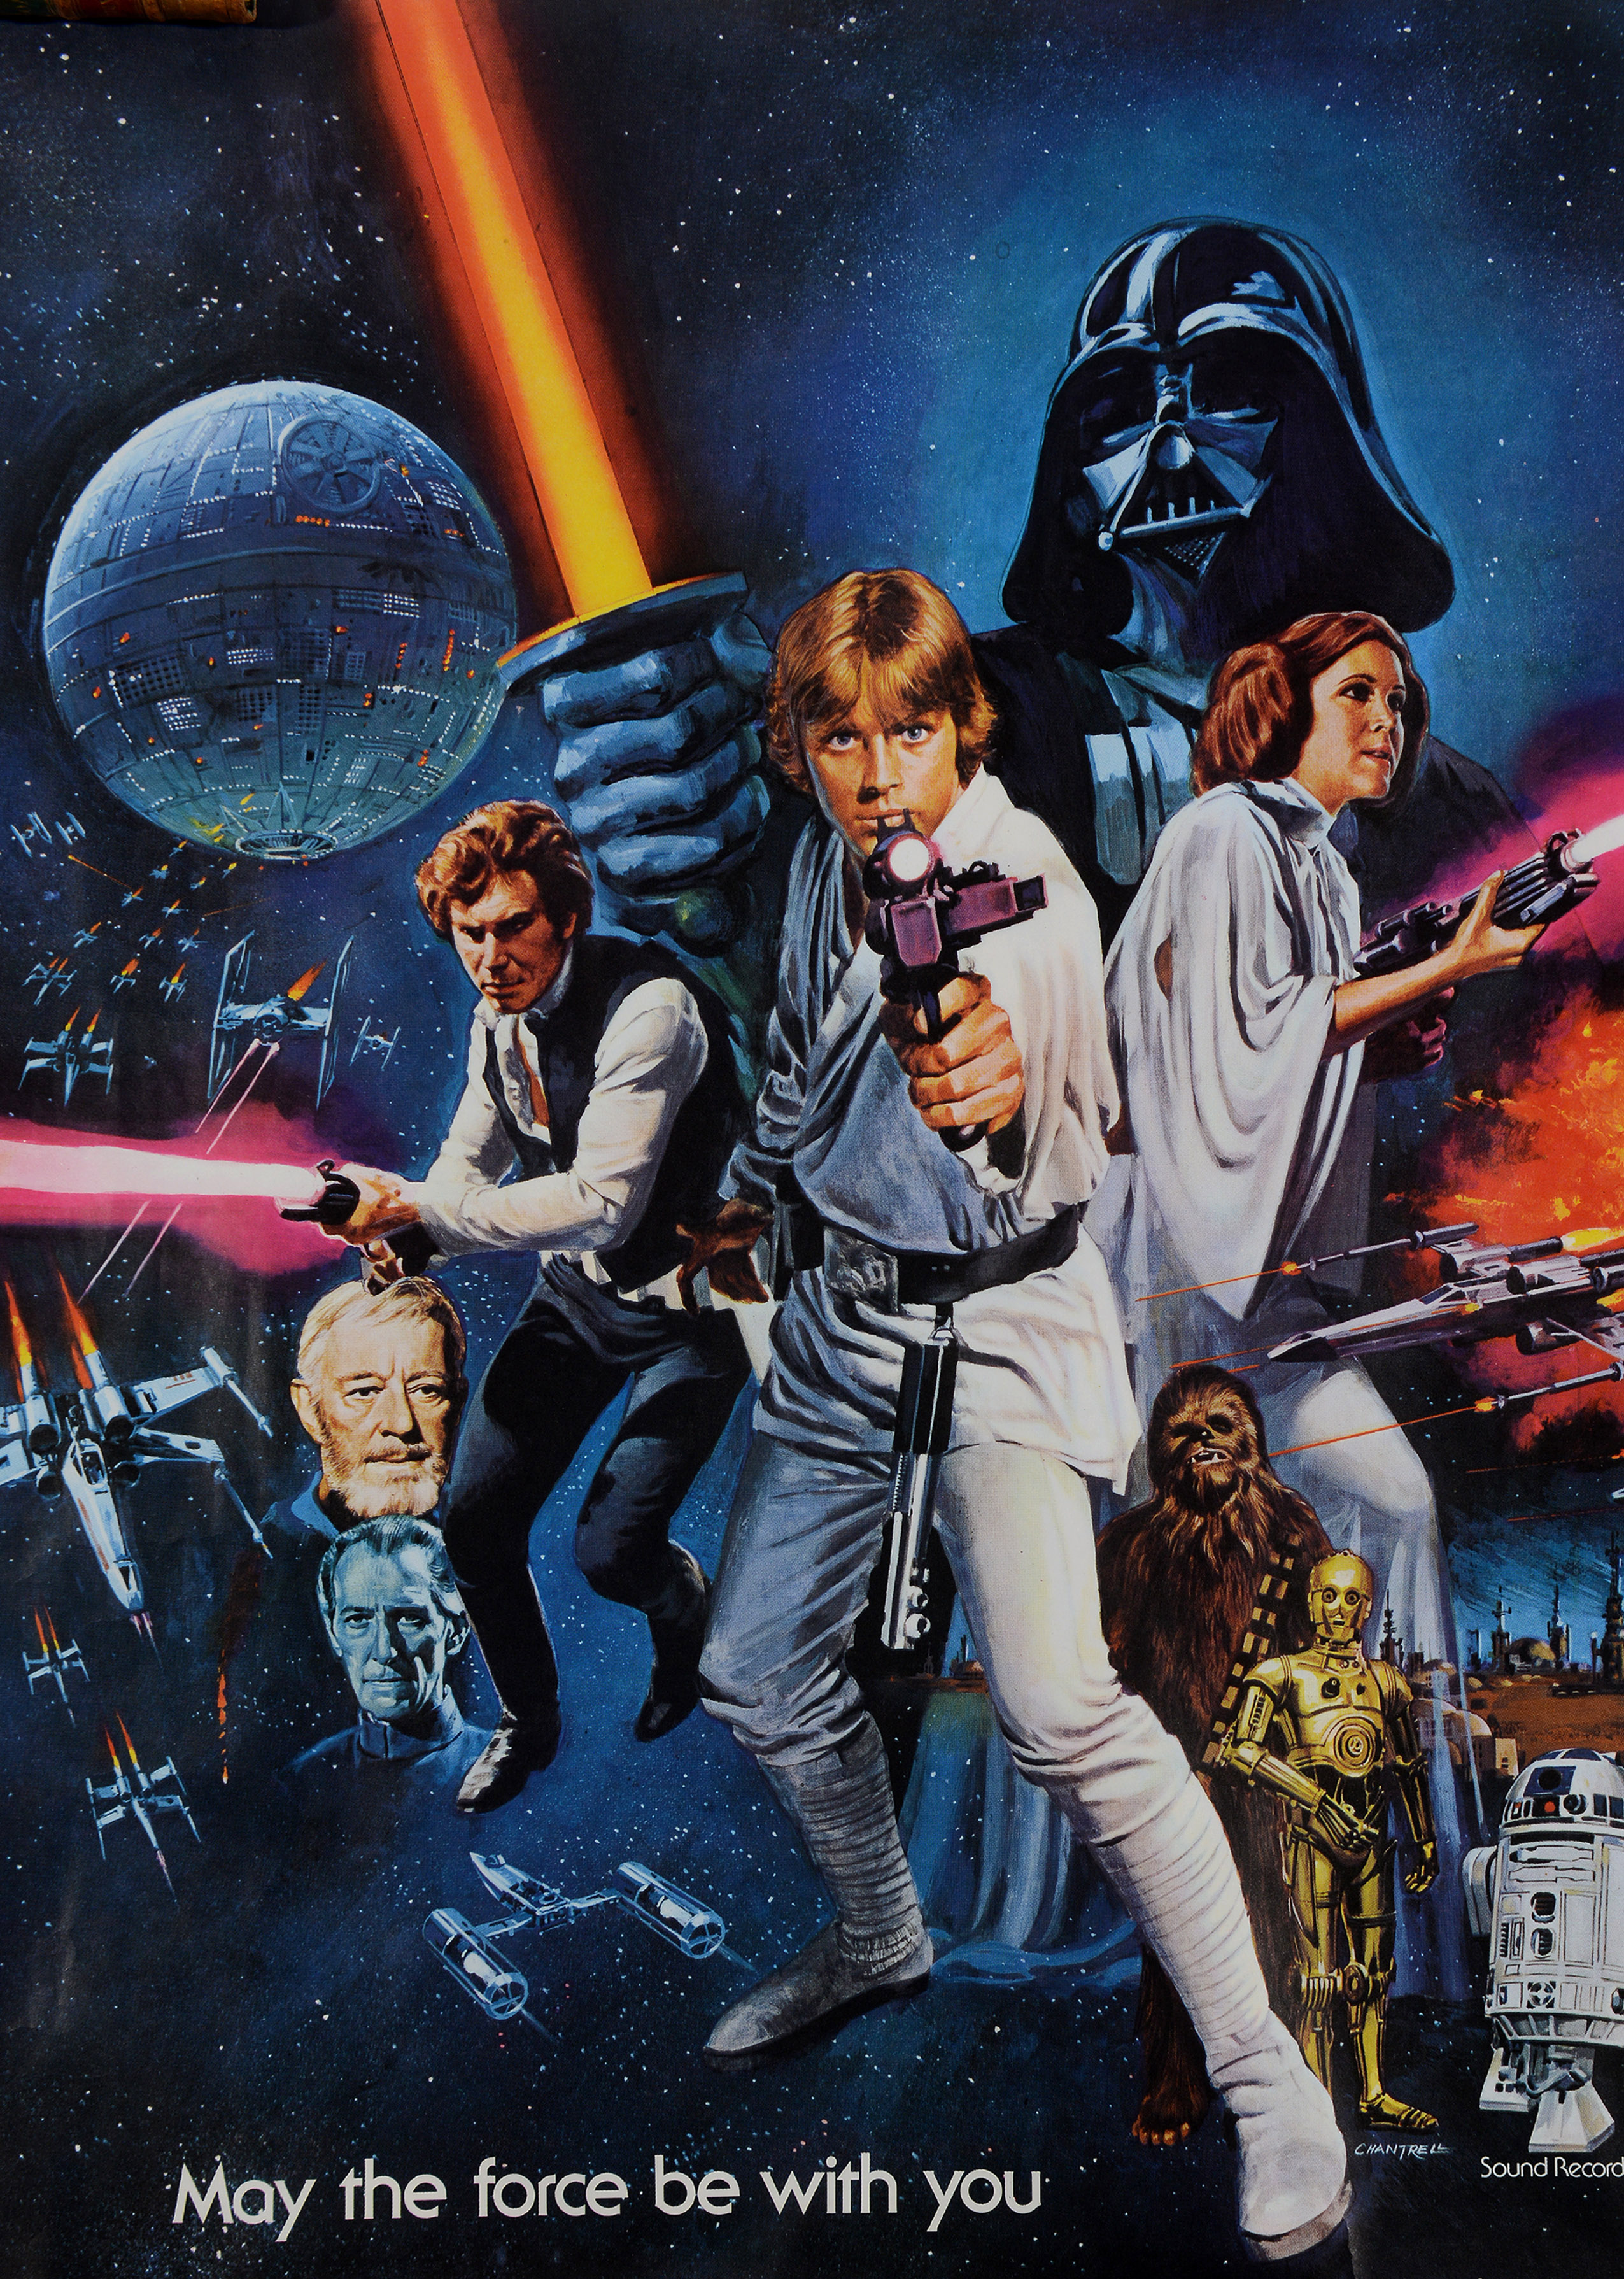 STAR WARS, British quad movie poster, 1977, Academy Awards version, with artwork by Tom Chantrell, - Image 3 of 5